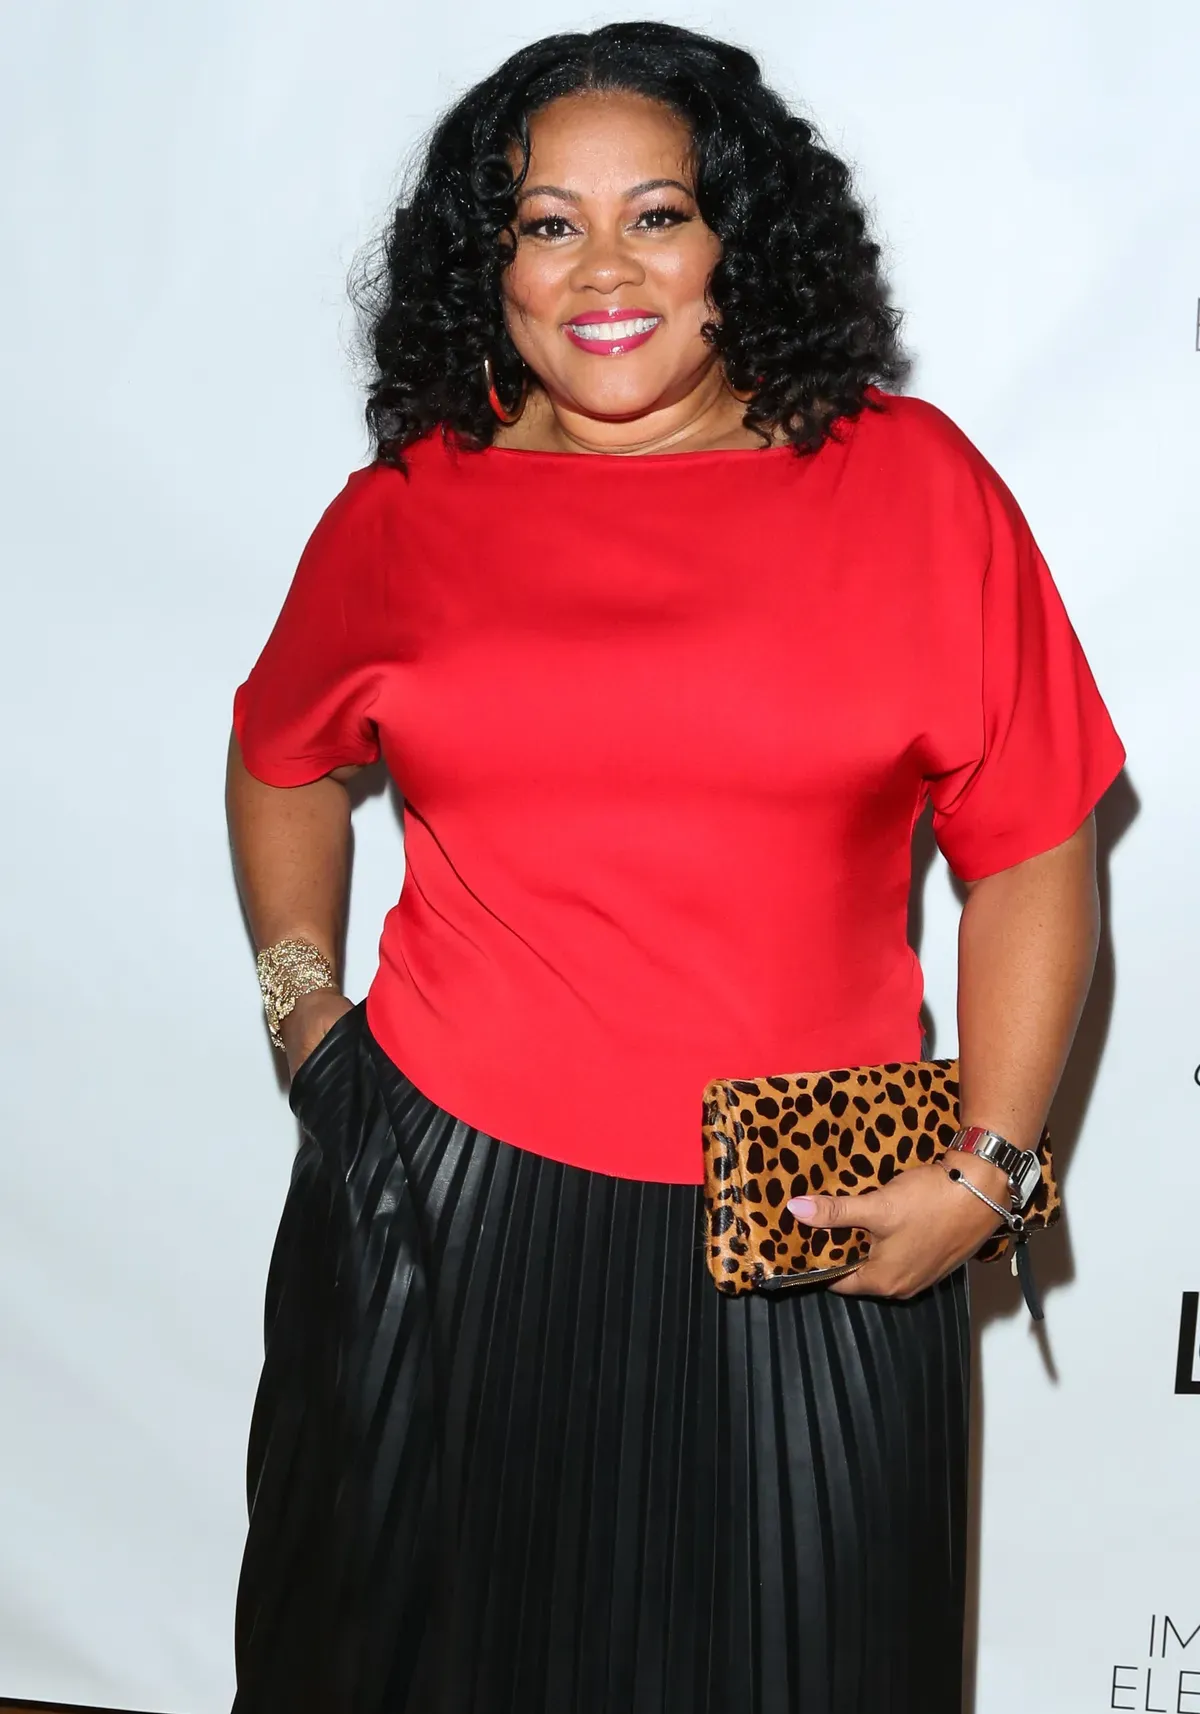 Lela Rochon attends the release party for the book "Every Day I'm Hustling" at Rain Bar and Lounge on April 8, 2018. | Photo: Getty Images